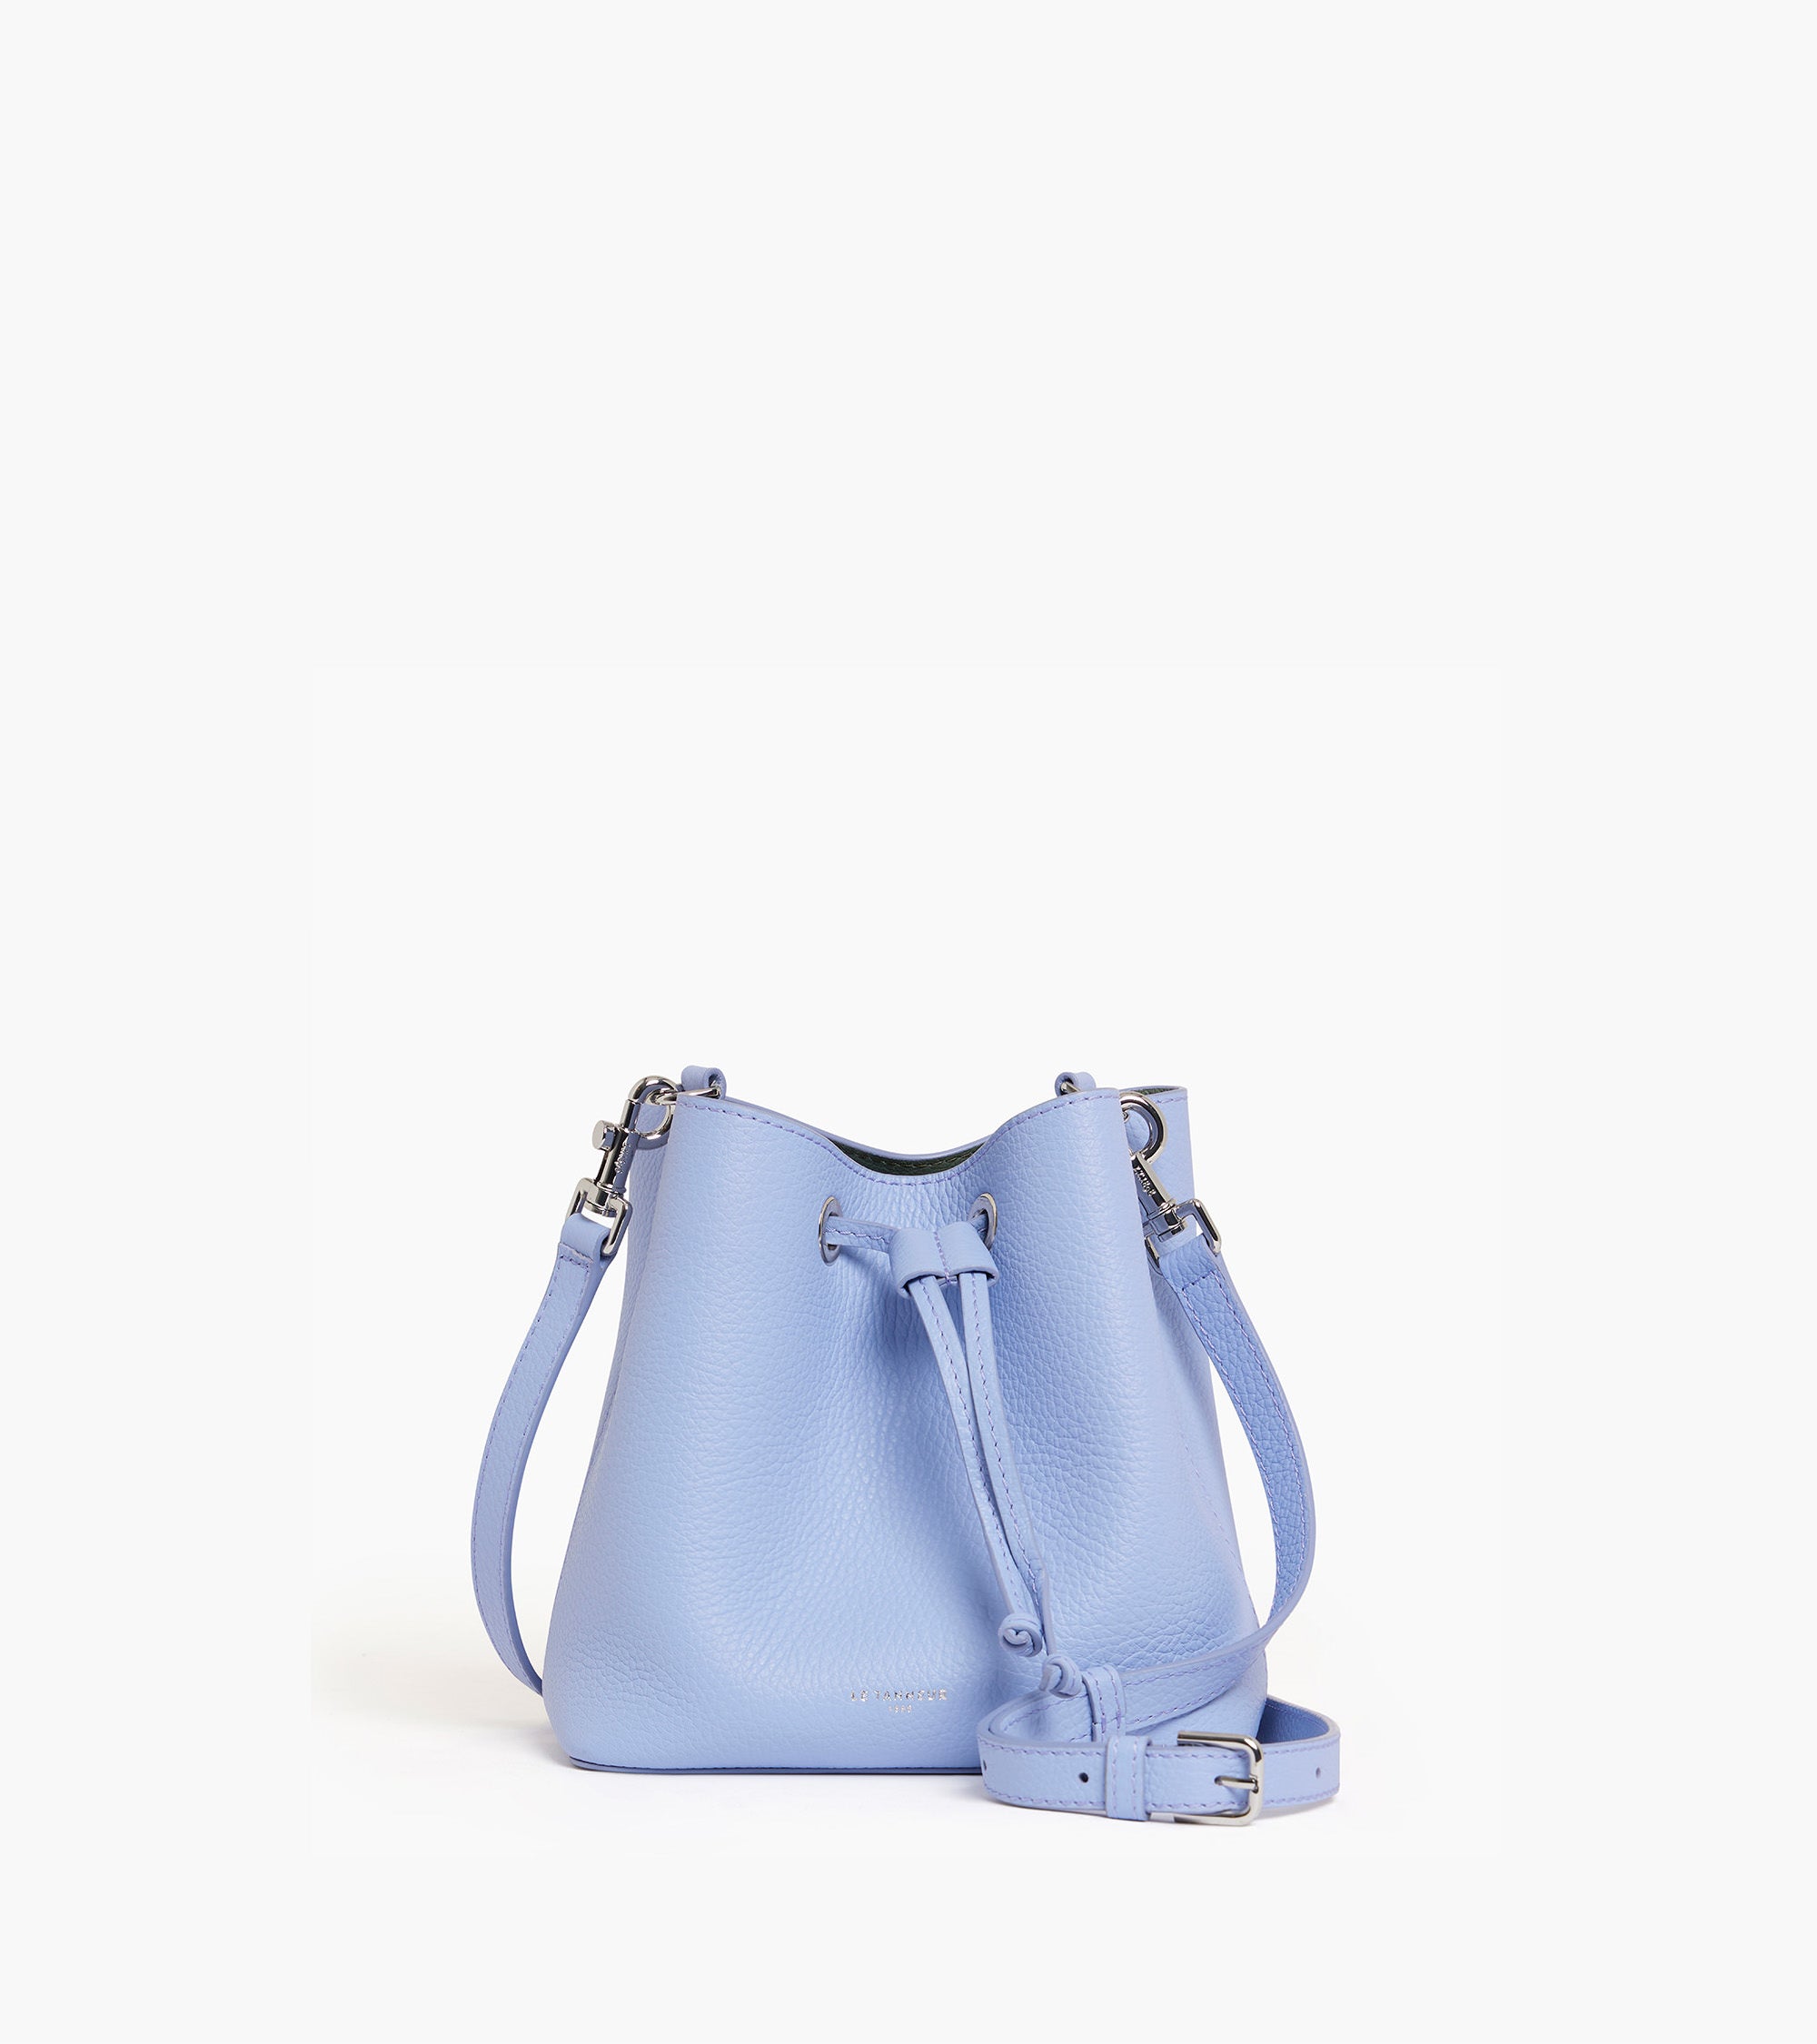 Louise min bucket bag in pebbled leather